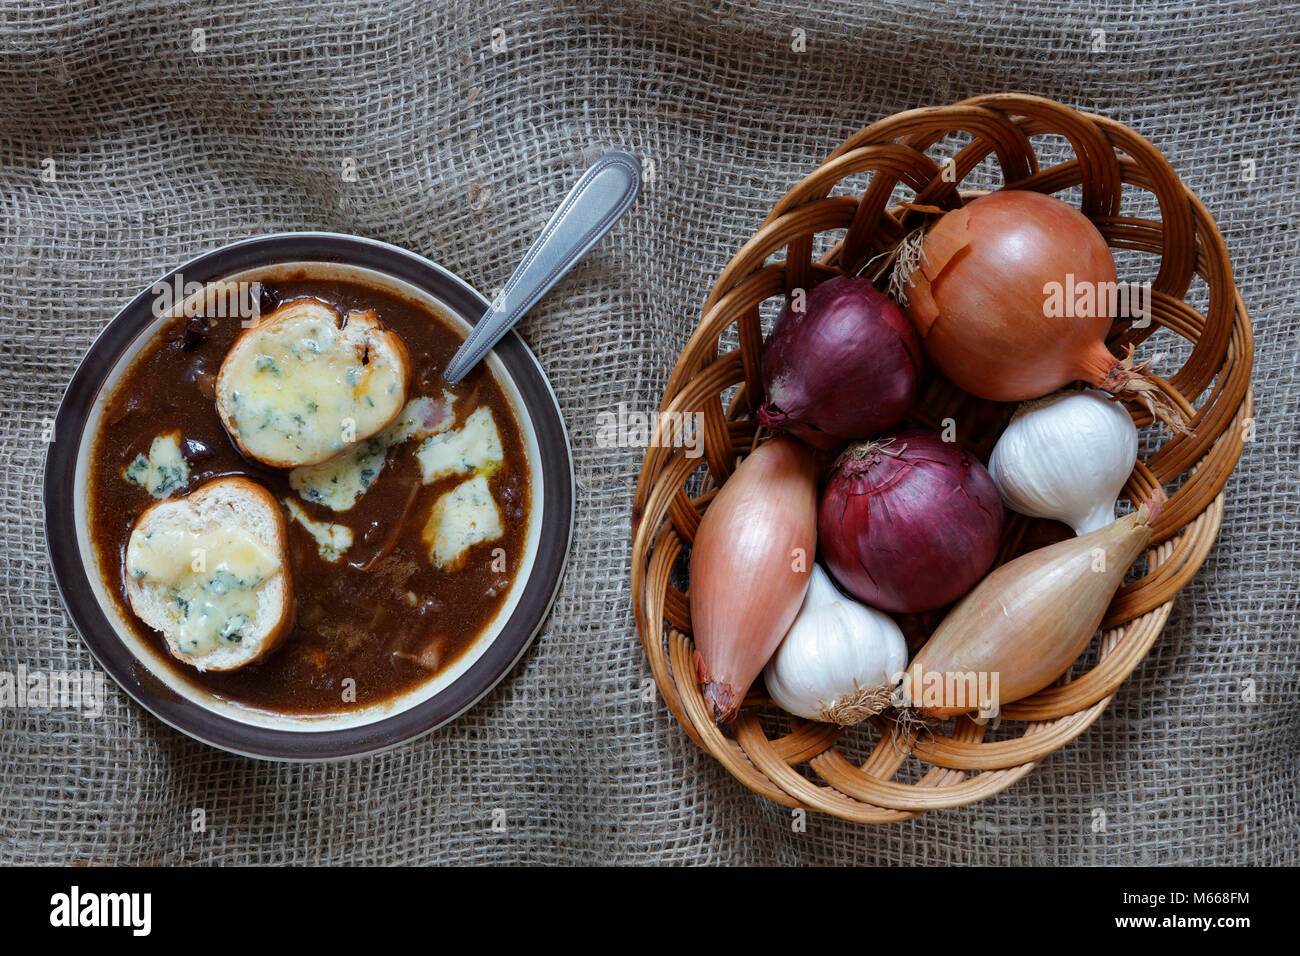 Onion Soup with blue stilton gruyere cheese with Garlic, French Echalion Shallots and red and brown onions in a wicker basket on a hessian cloth backg Stock Photo